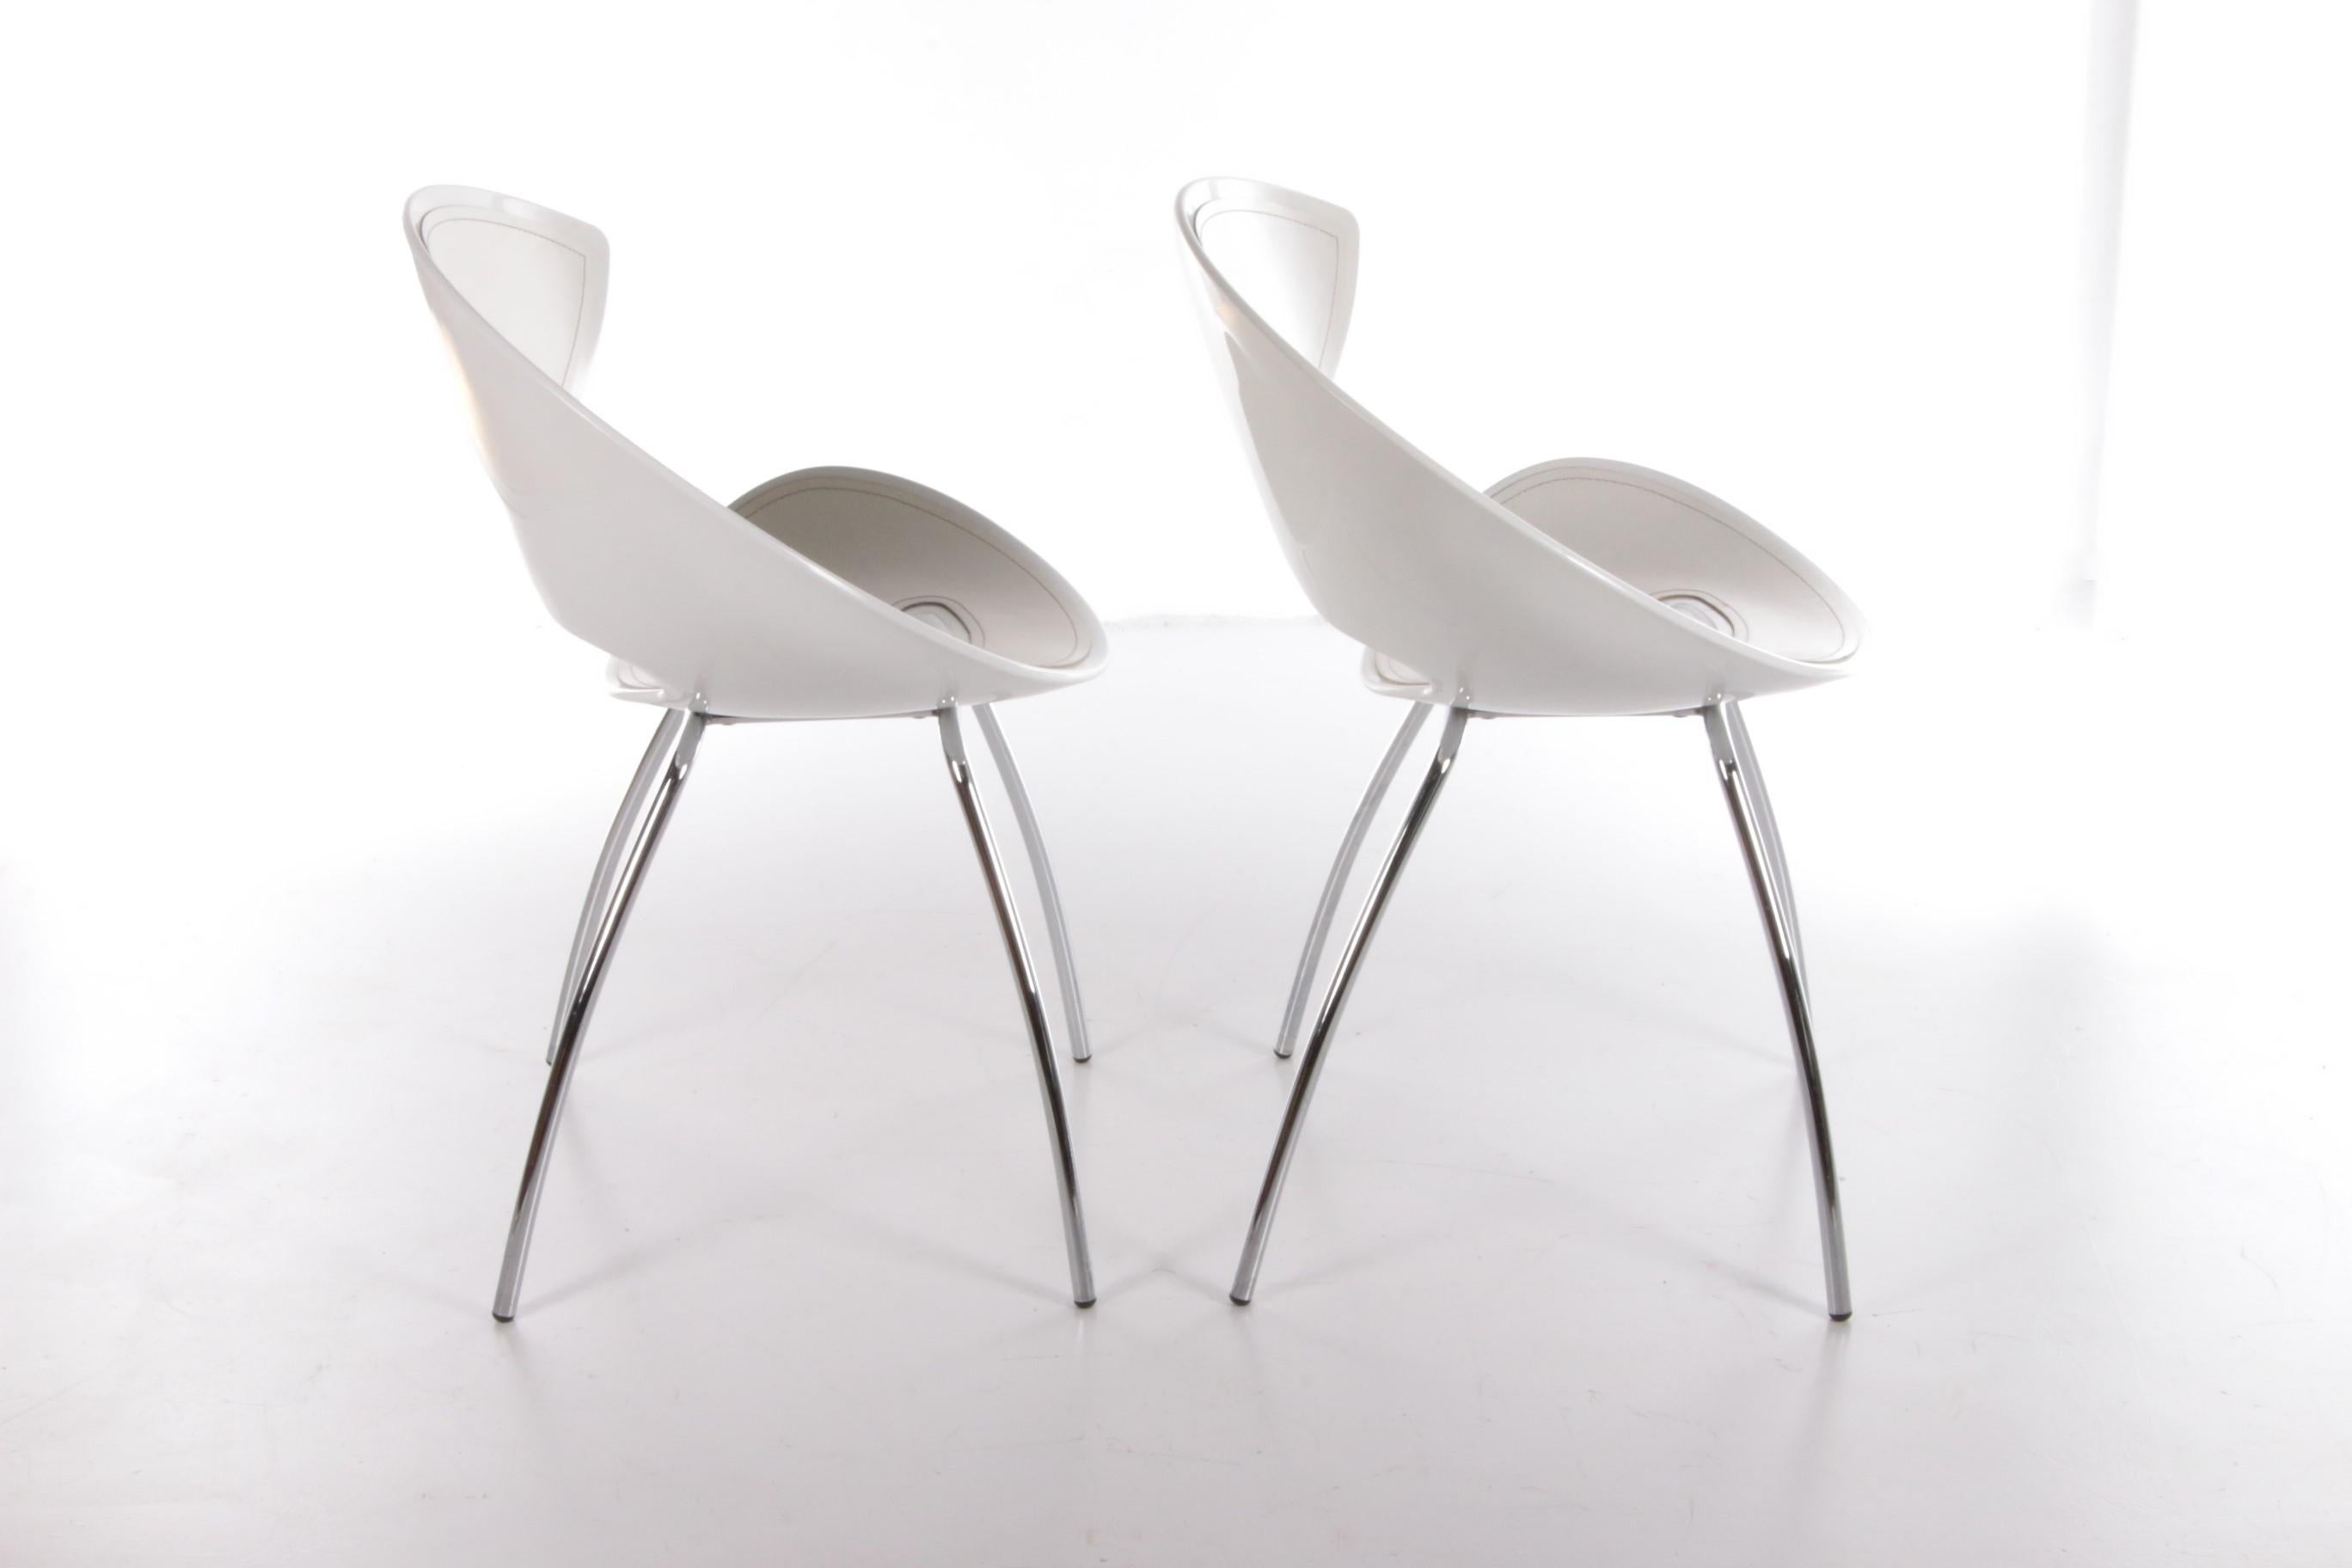 Steel Set of Italian Dining Room Chairs Model Twist with Leather and Chrome Legs